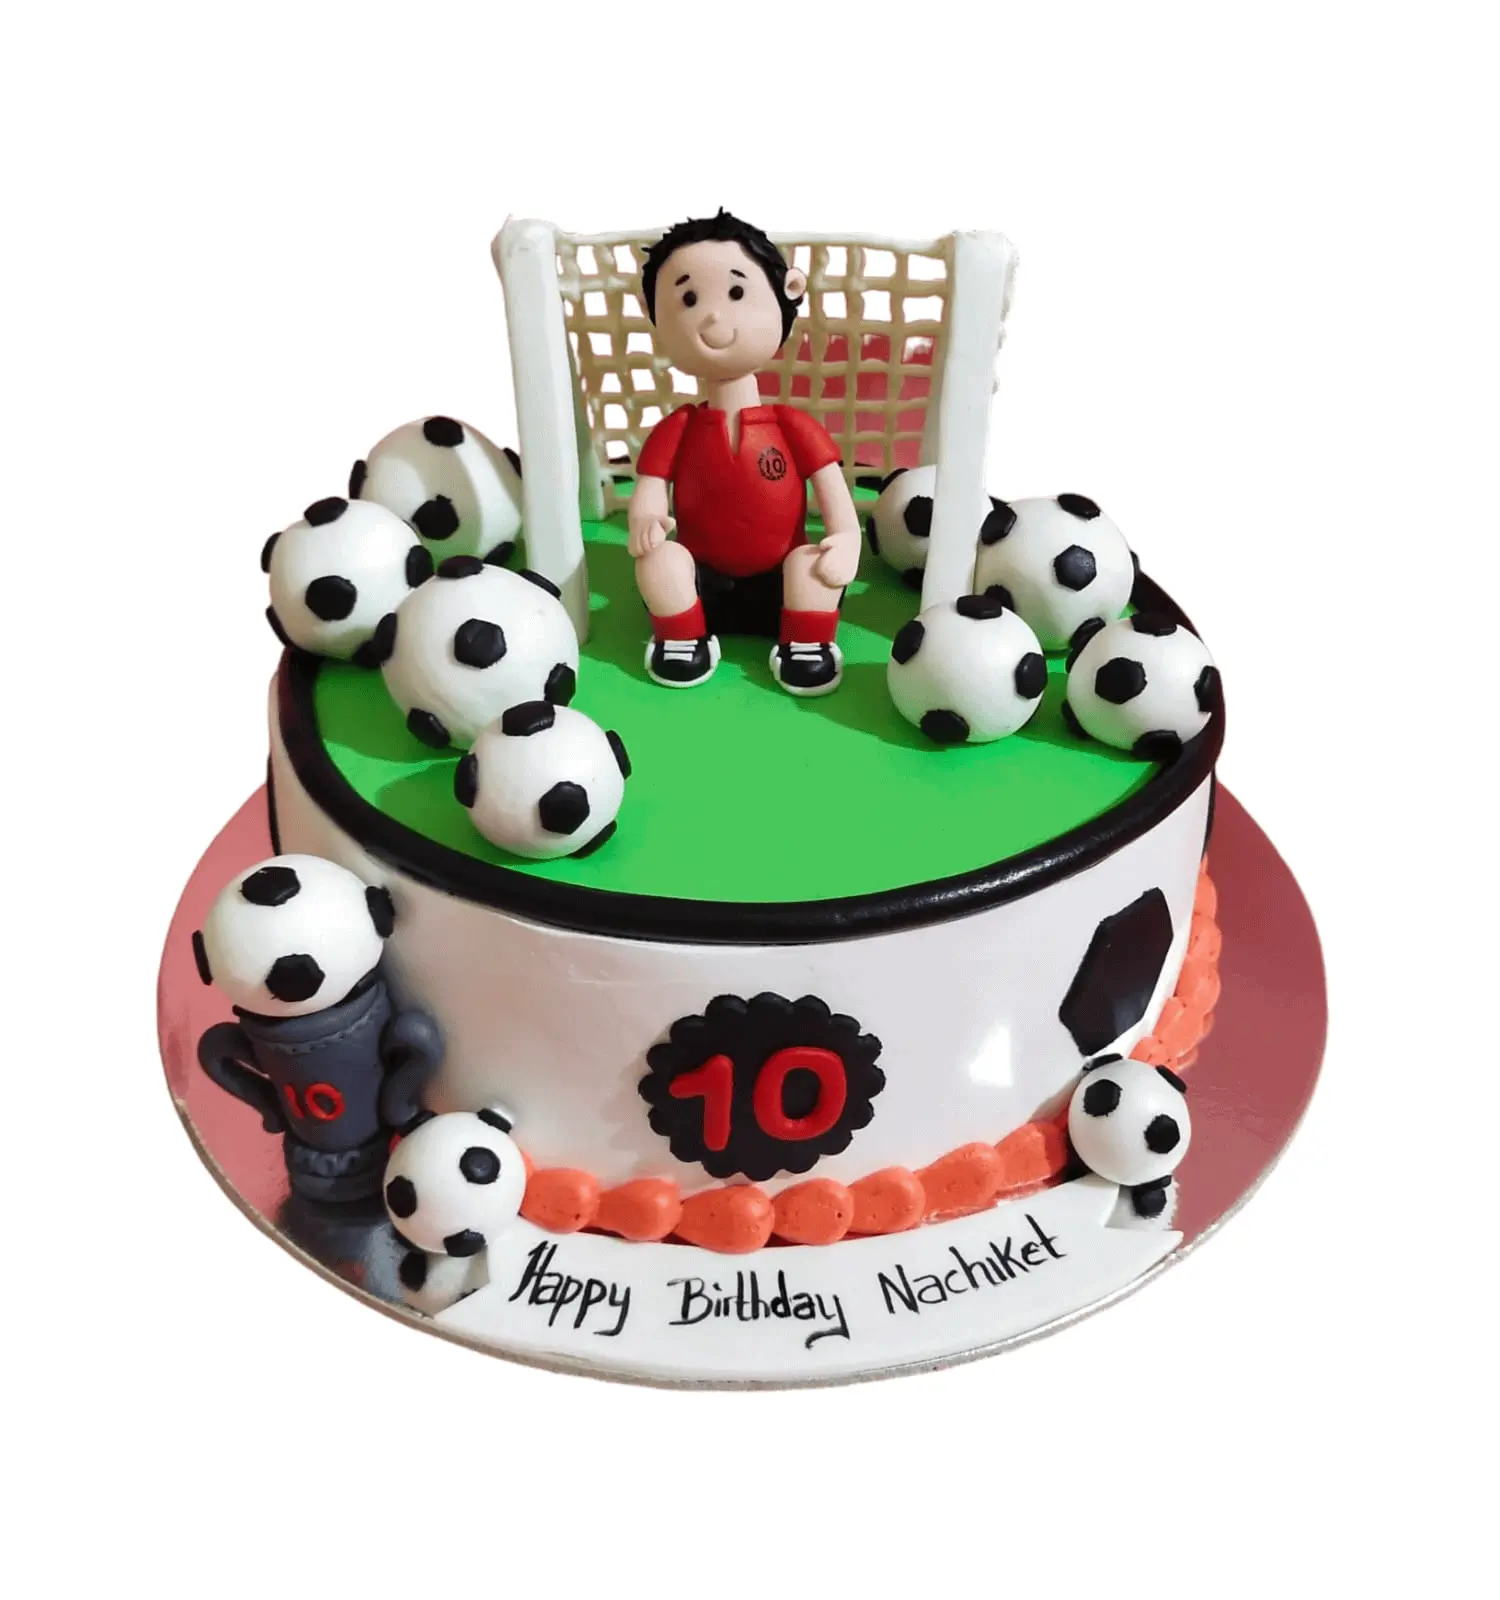 Football Themed Cakes – A Little of This and That